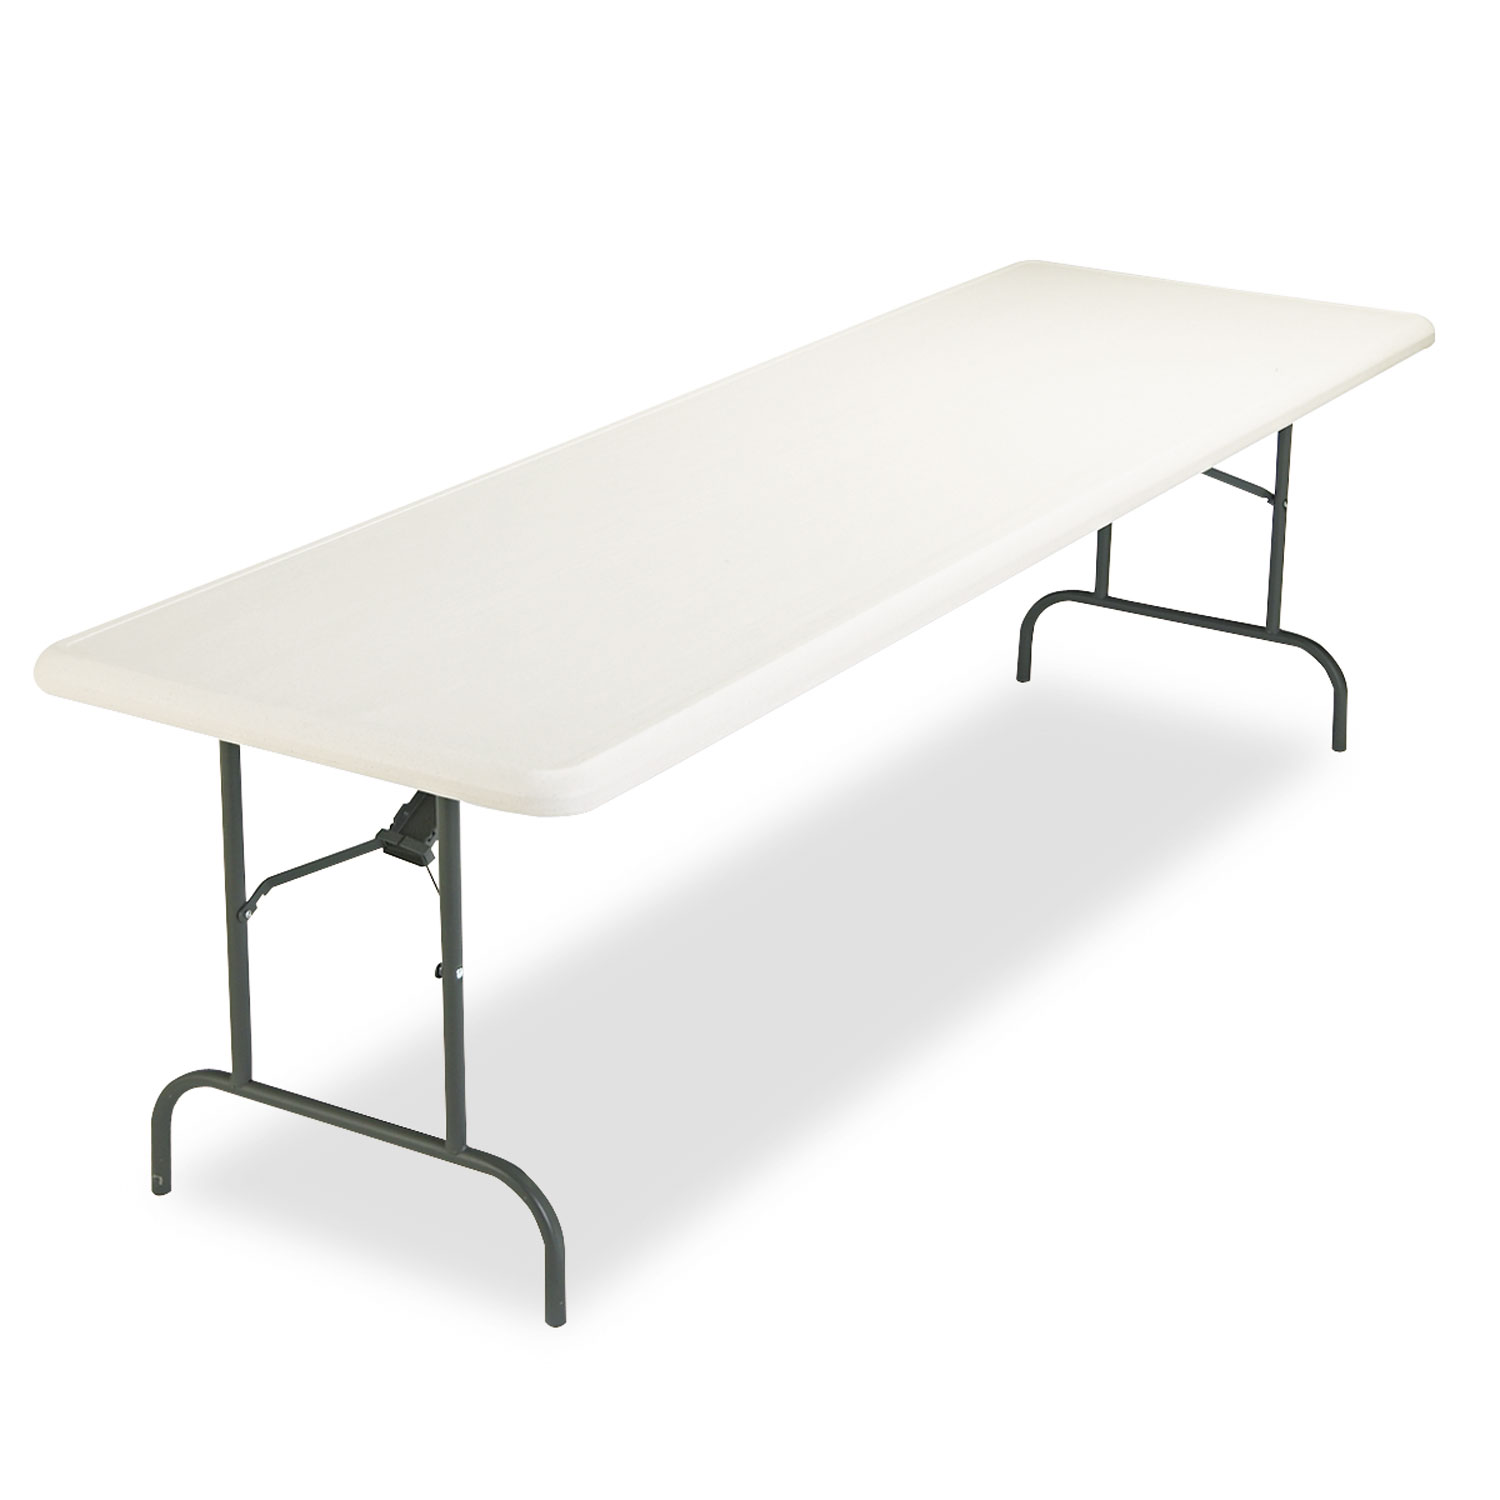  Iceberg 65233 IndestrucTables Too 1200 Series Folding Table, 96w x 30d x 29h, Platinum (ICE65233) 